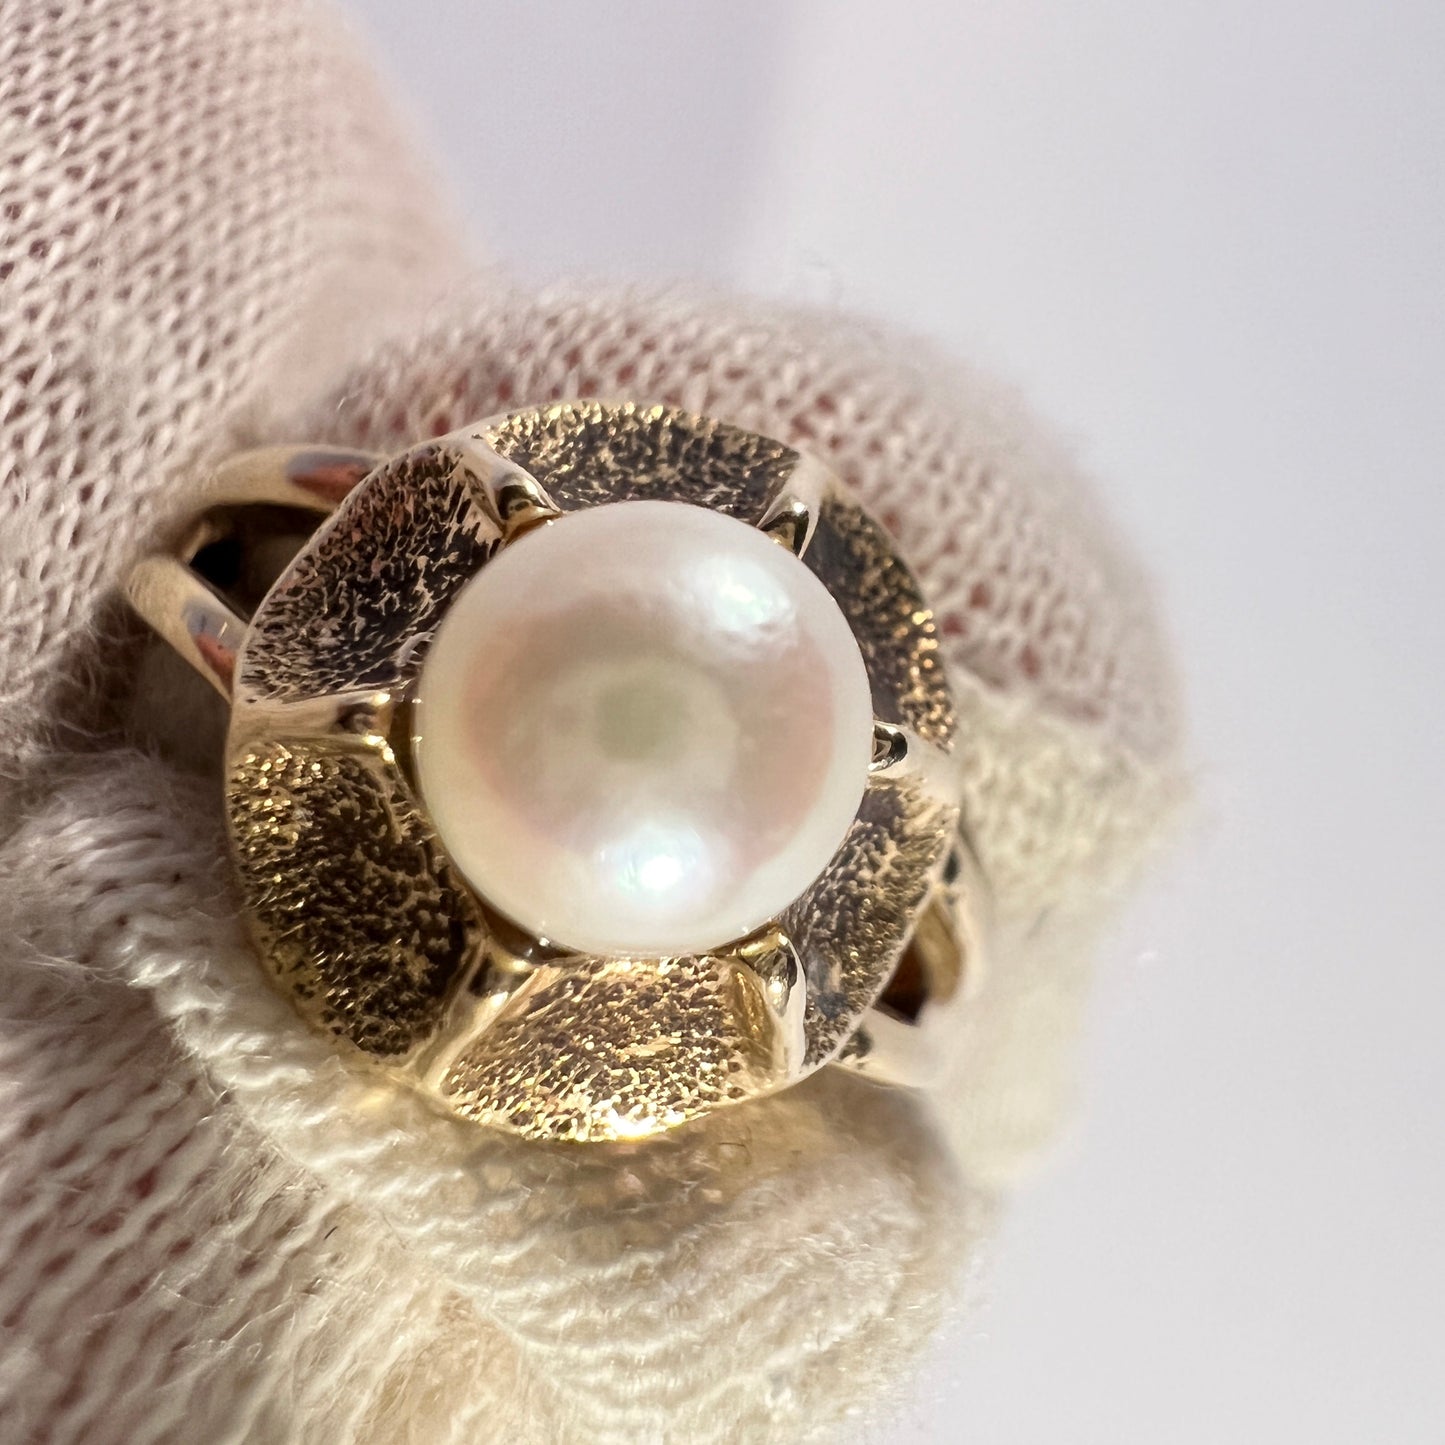 Vintage Mid Century 14k Gold Cultured Pearl Ring.